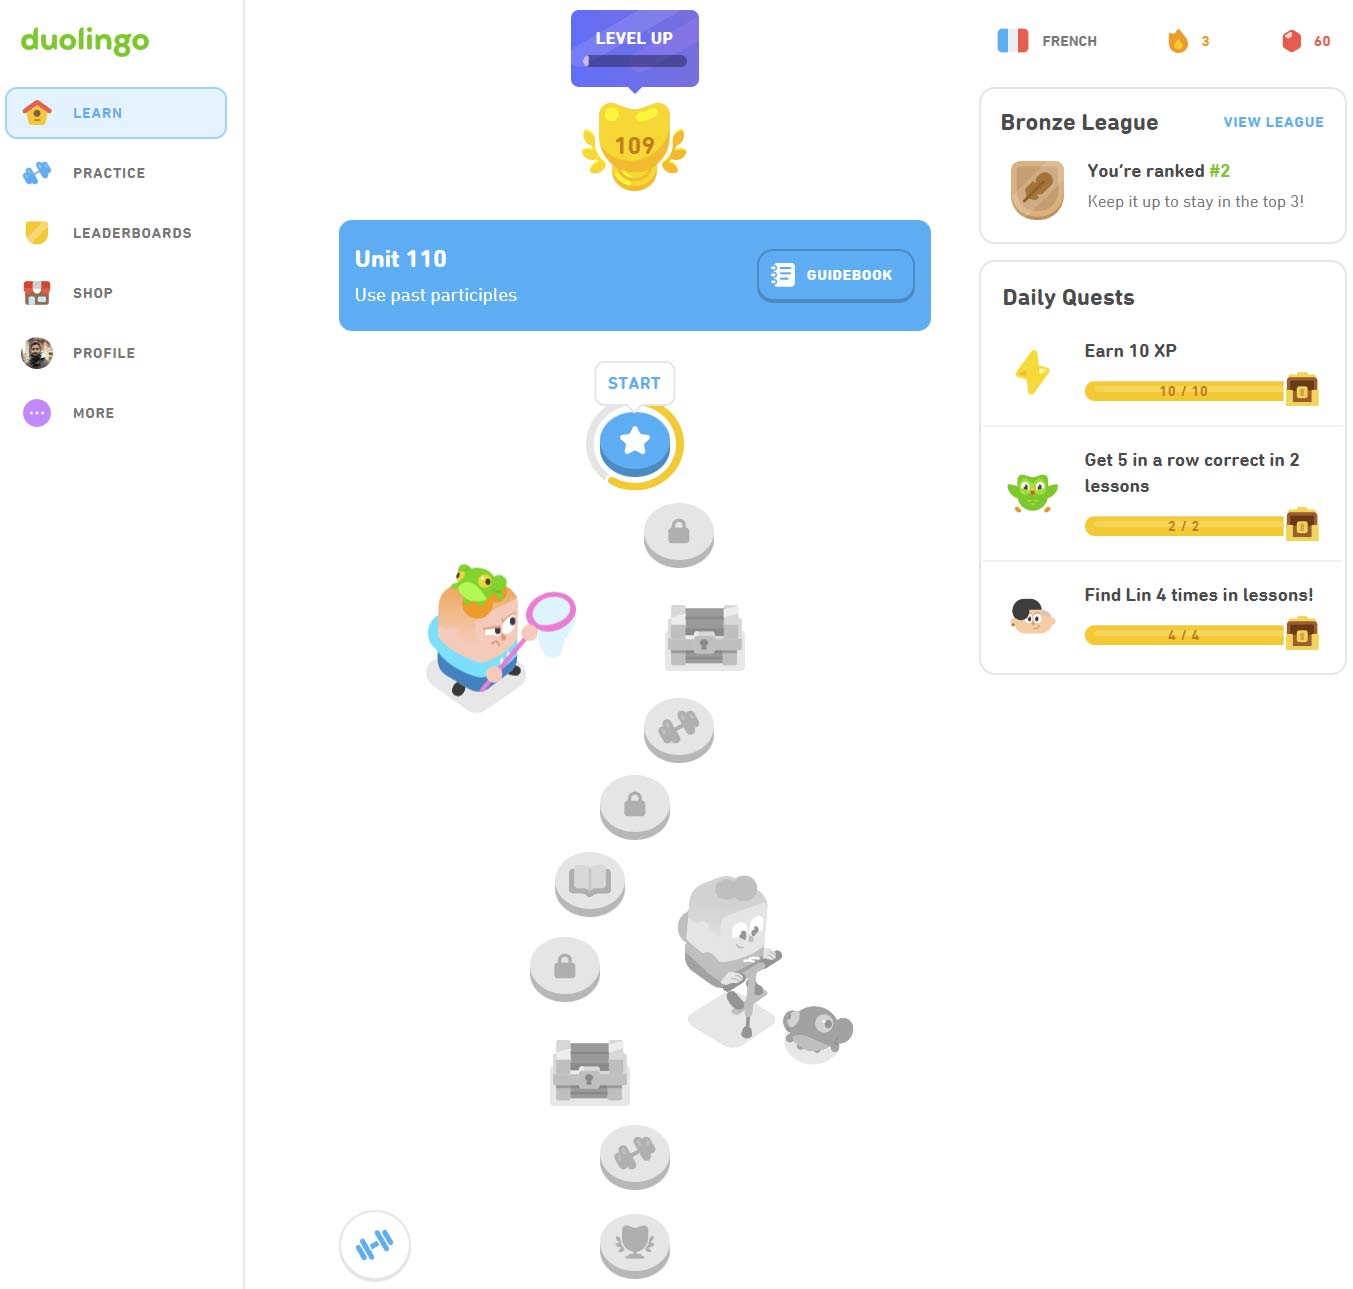 Screenshot of the Duolingo web interface, showcasing a visually appealing layout with language lessons, progress tracking, and gamification elements, providing an engaging and user-friendly experience for online language learning